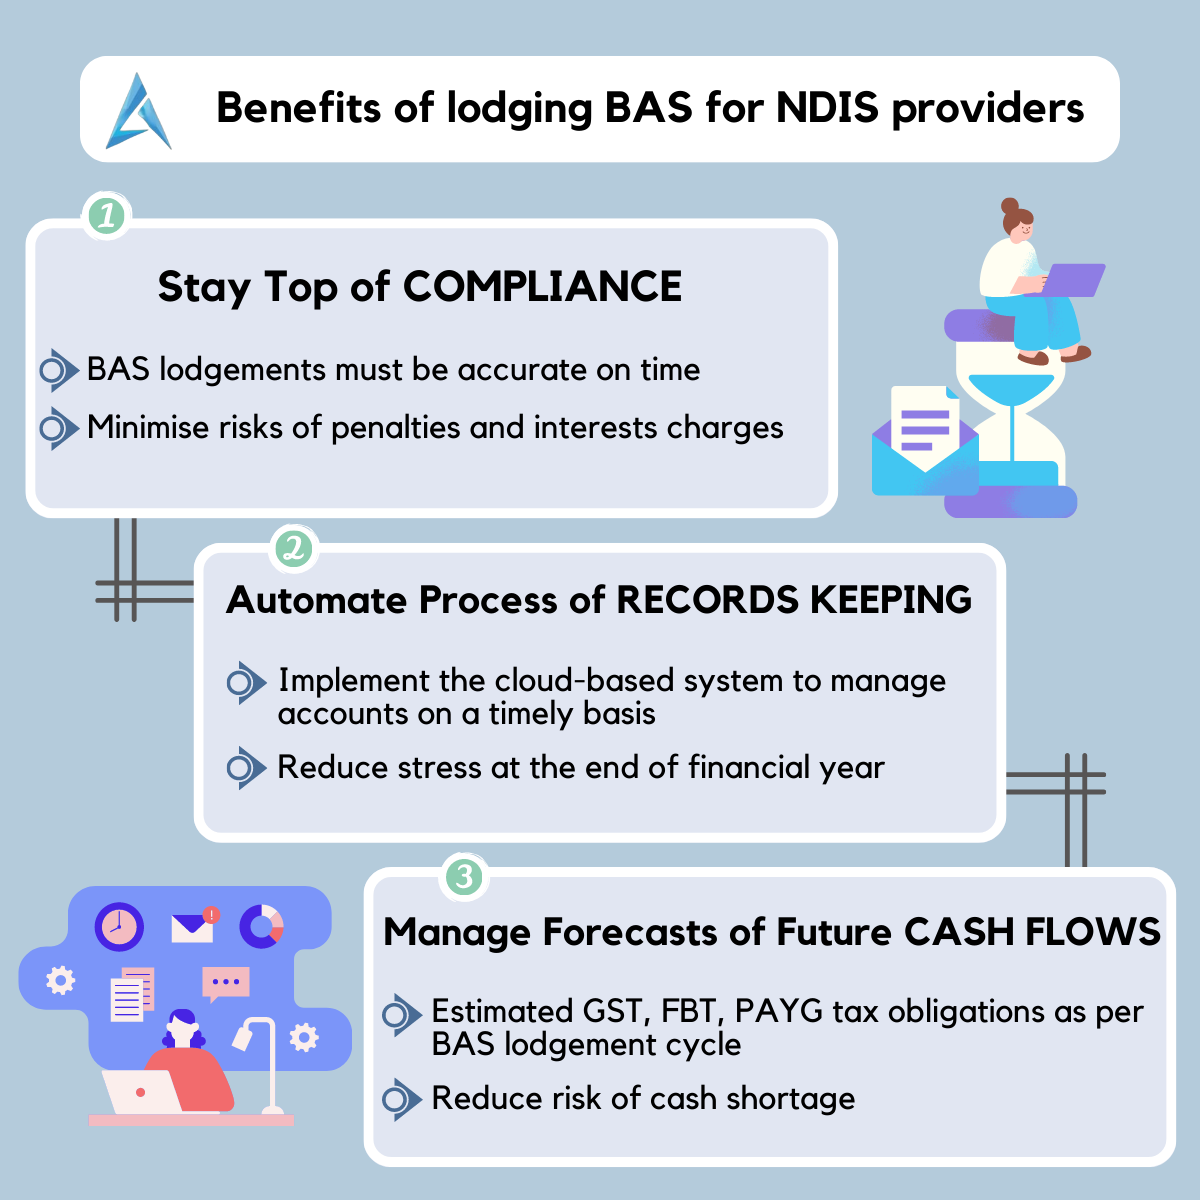 Benefits of lodging BAS for NDIS providers